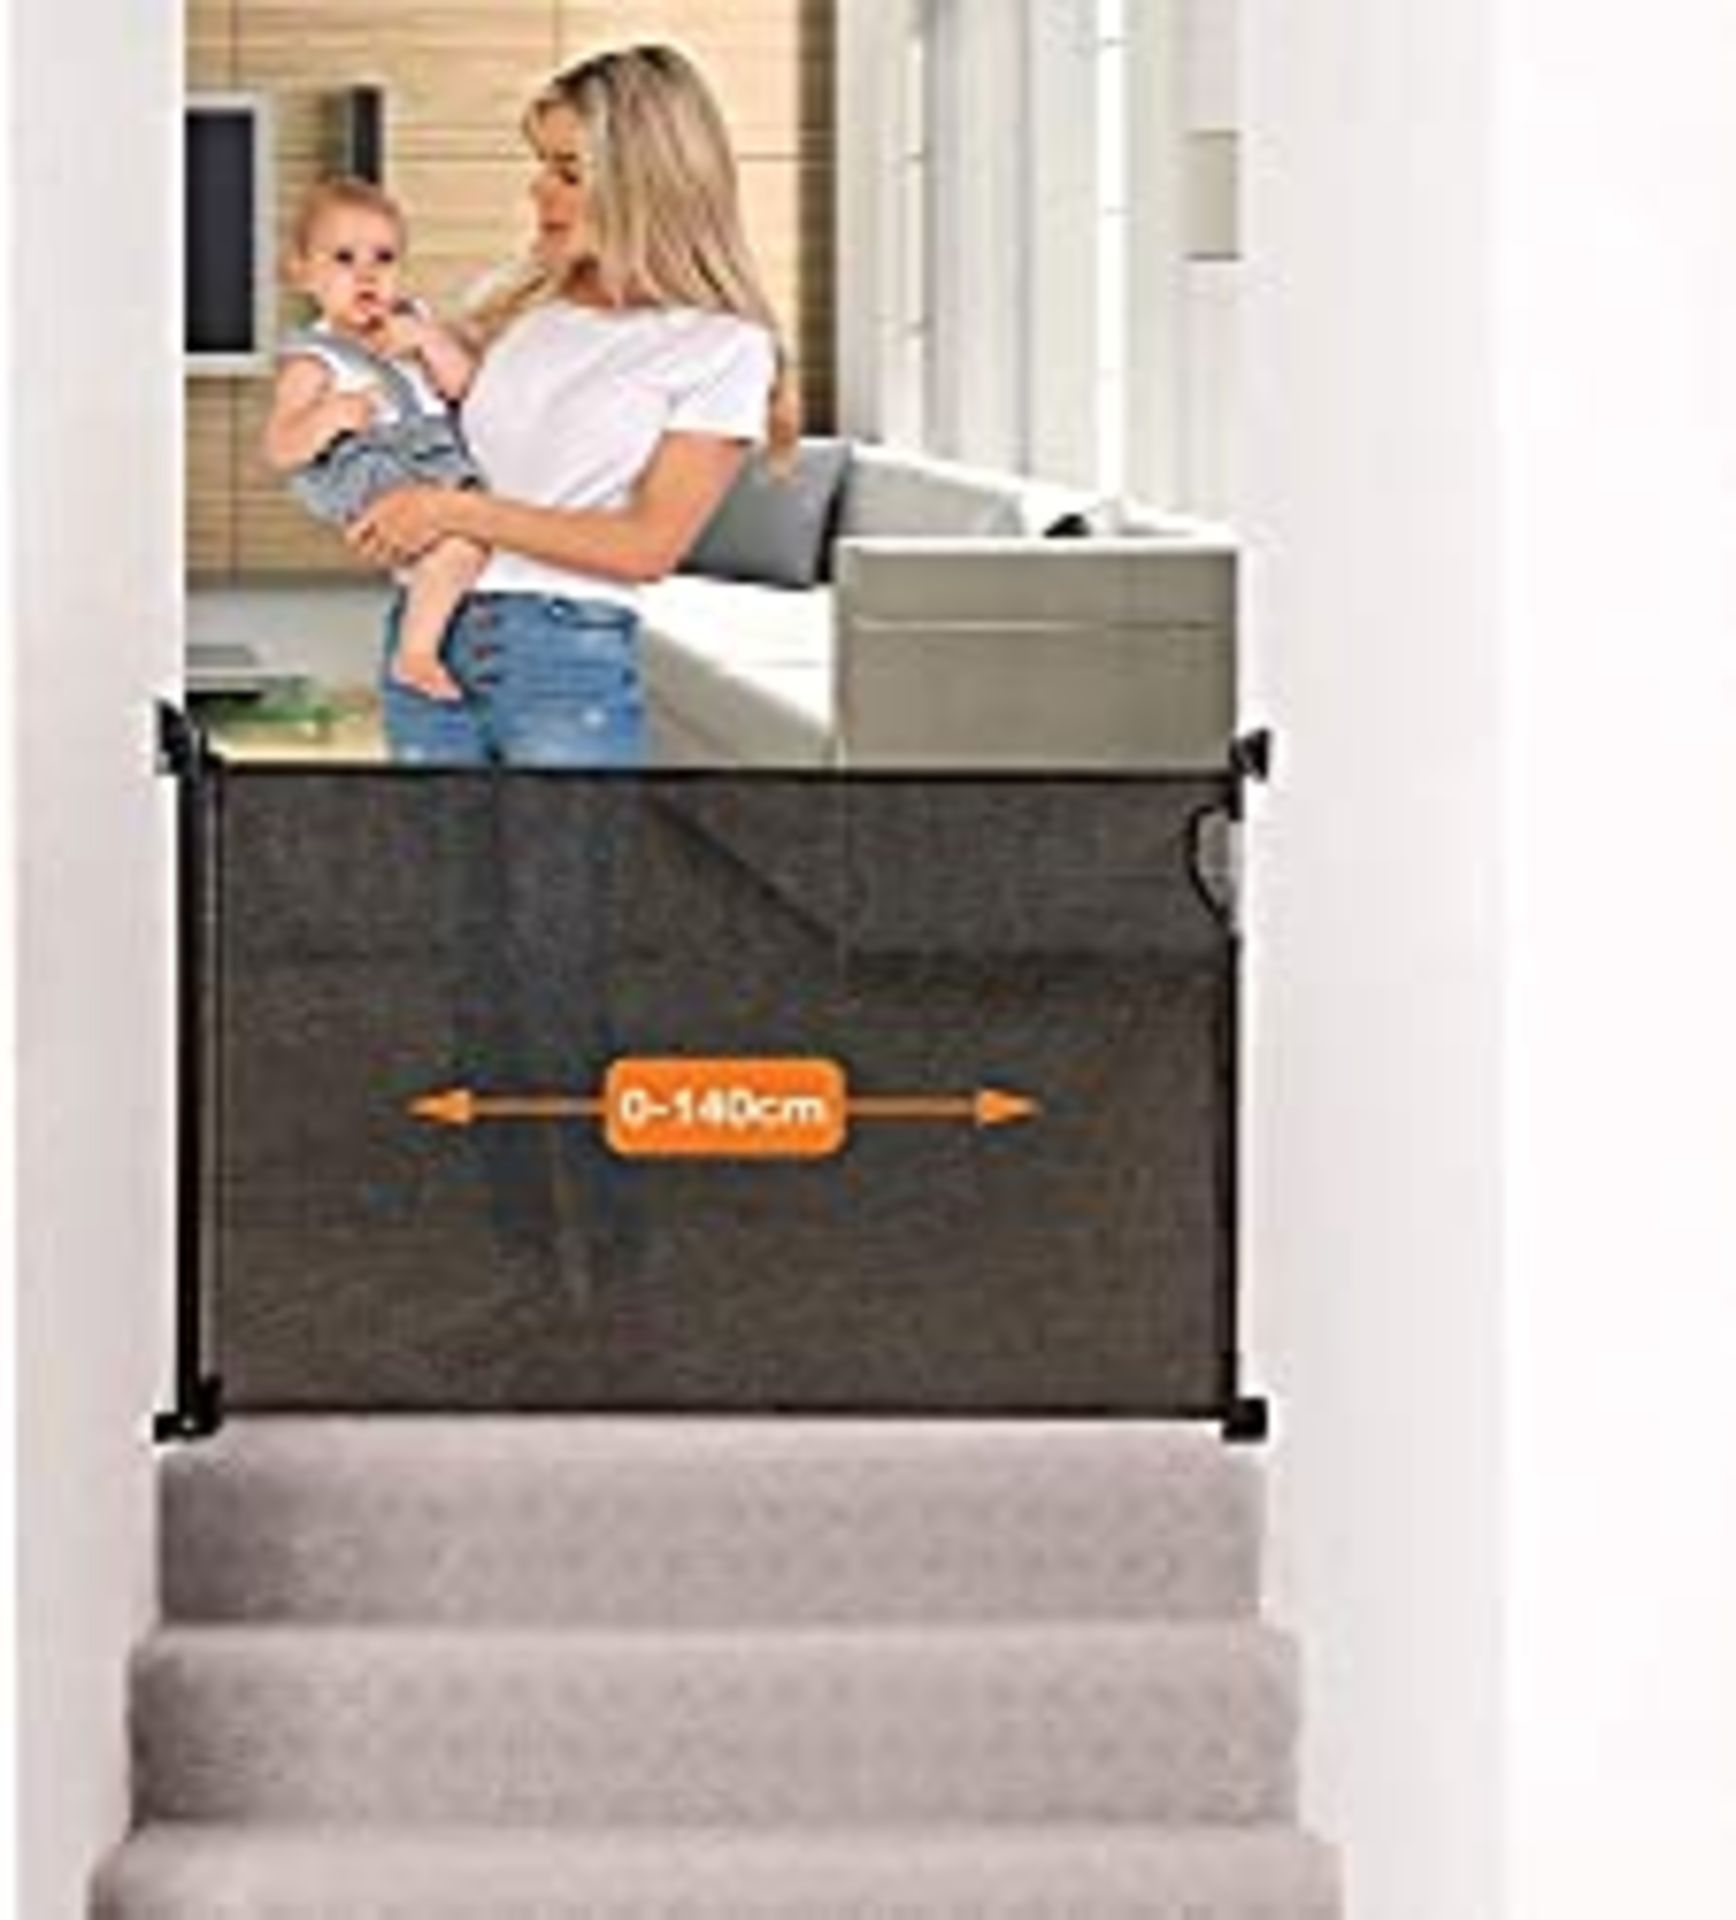 RRP £49.99 Dreambaby Retractable Baby Safety Gate